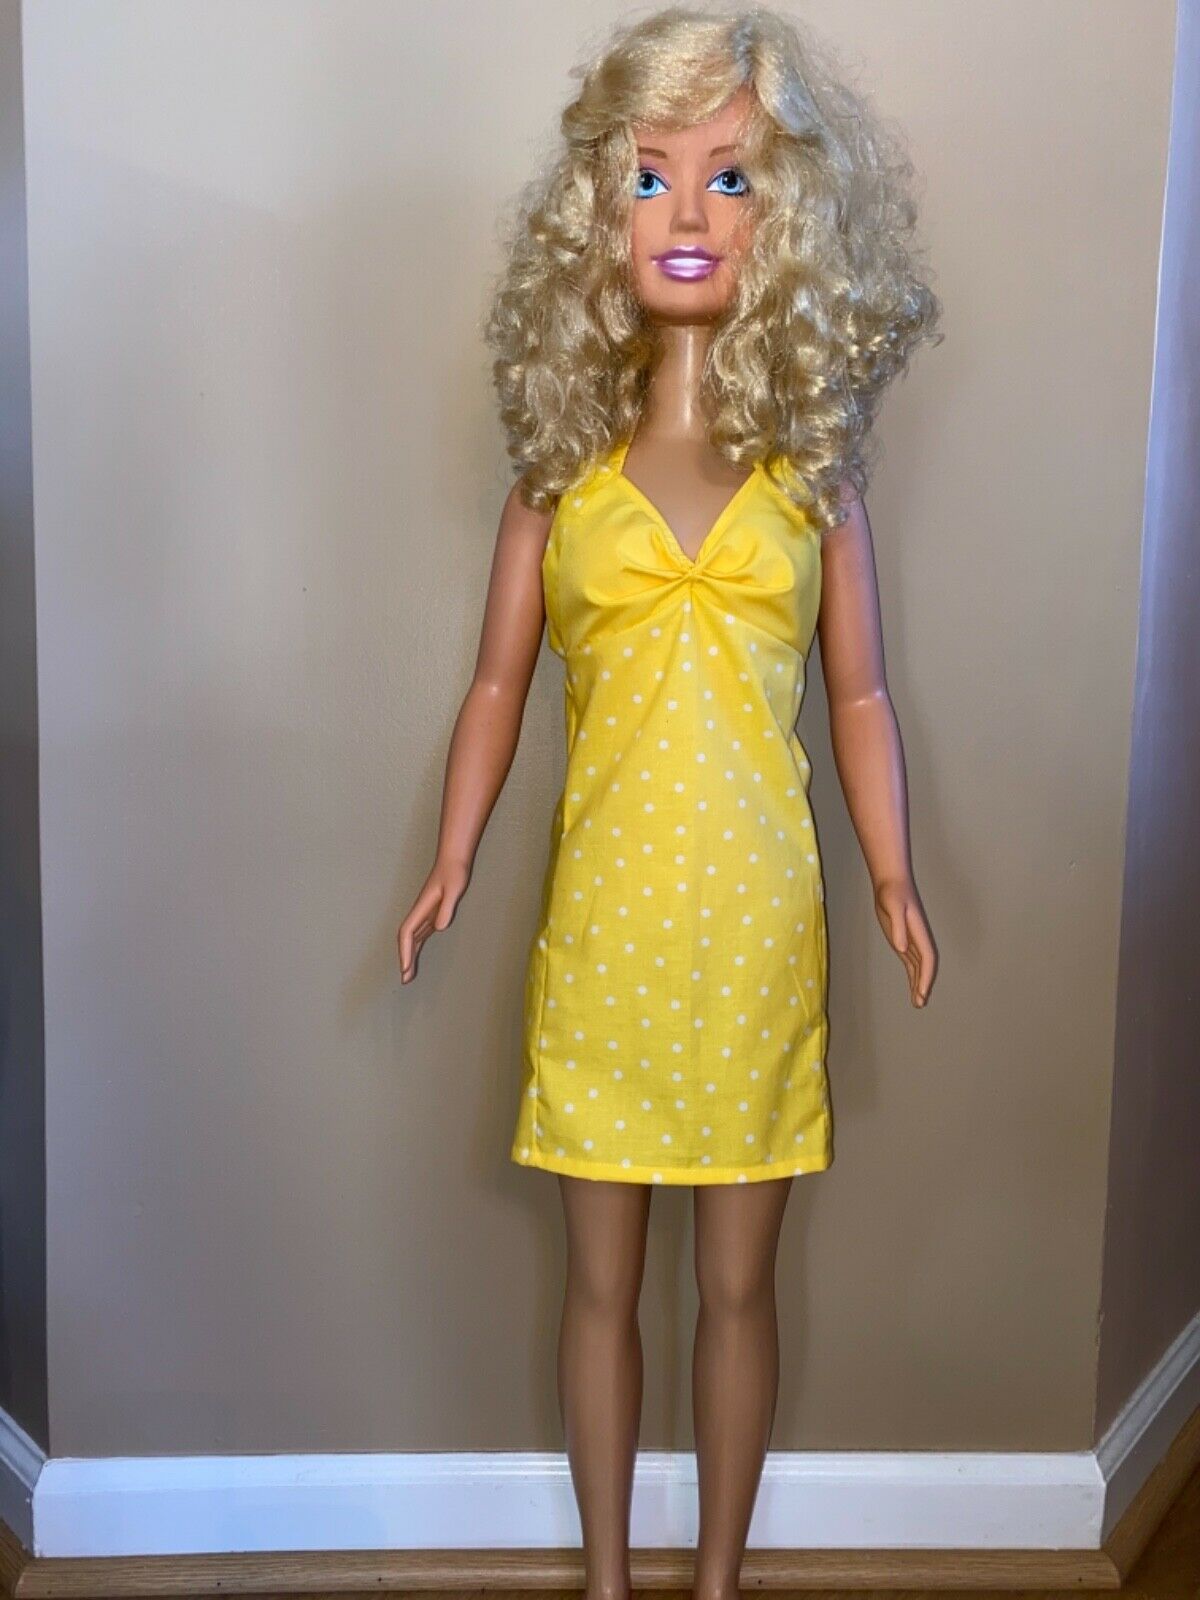 My Size Barbie Clothes - 36 Inch- Yellow Polka Dot Sundress